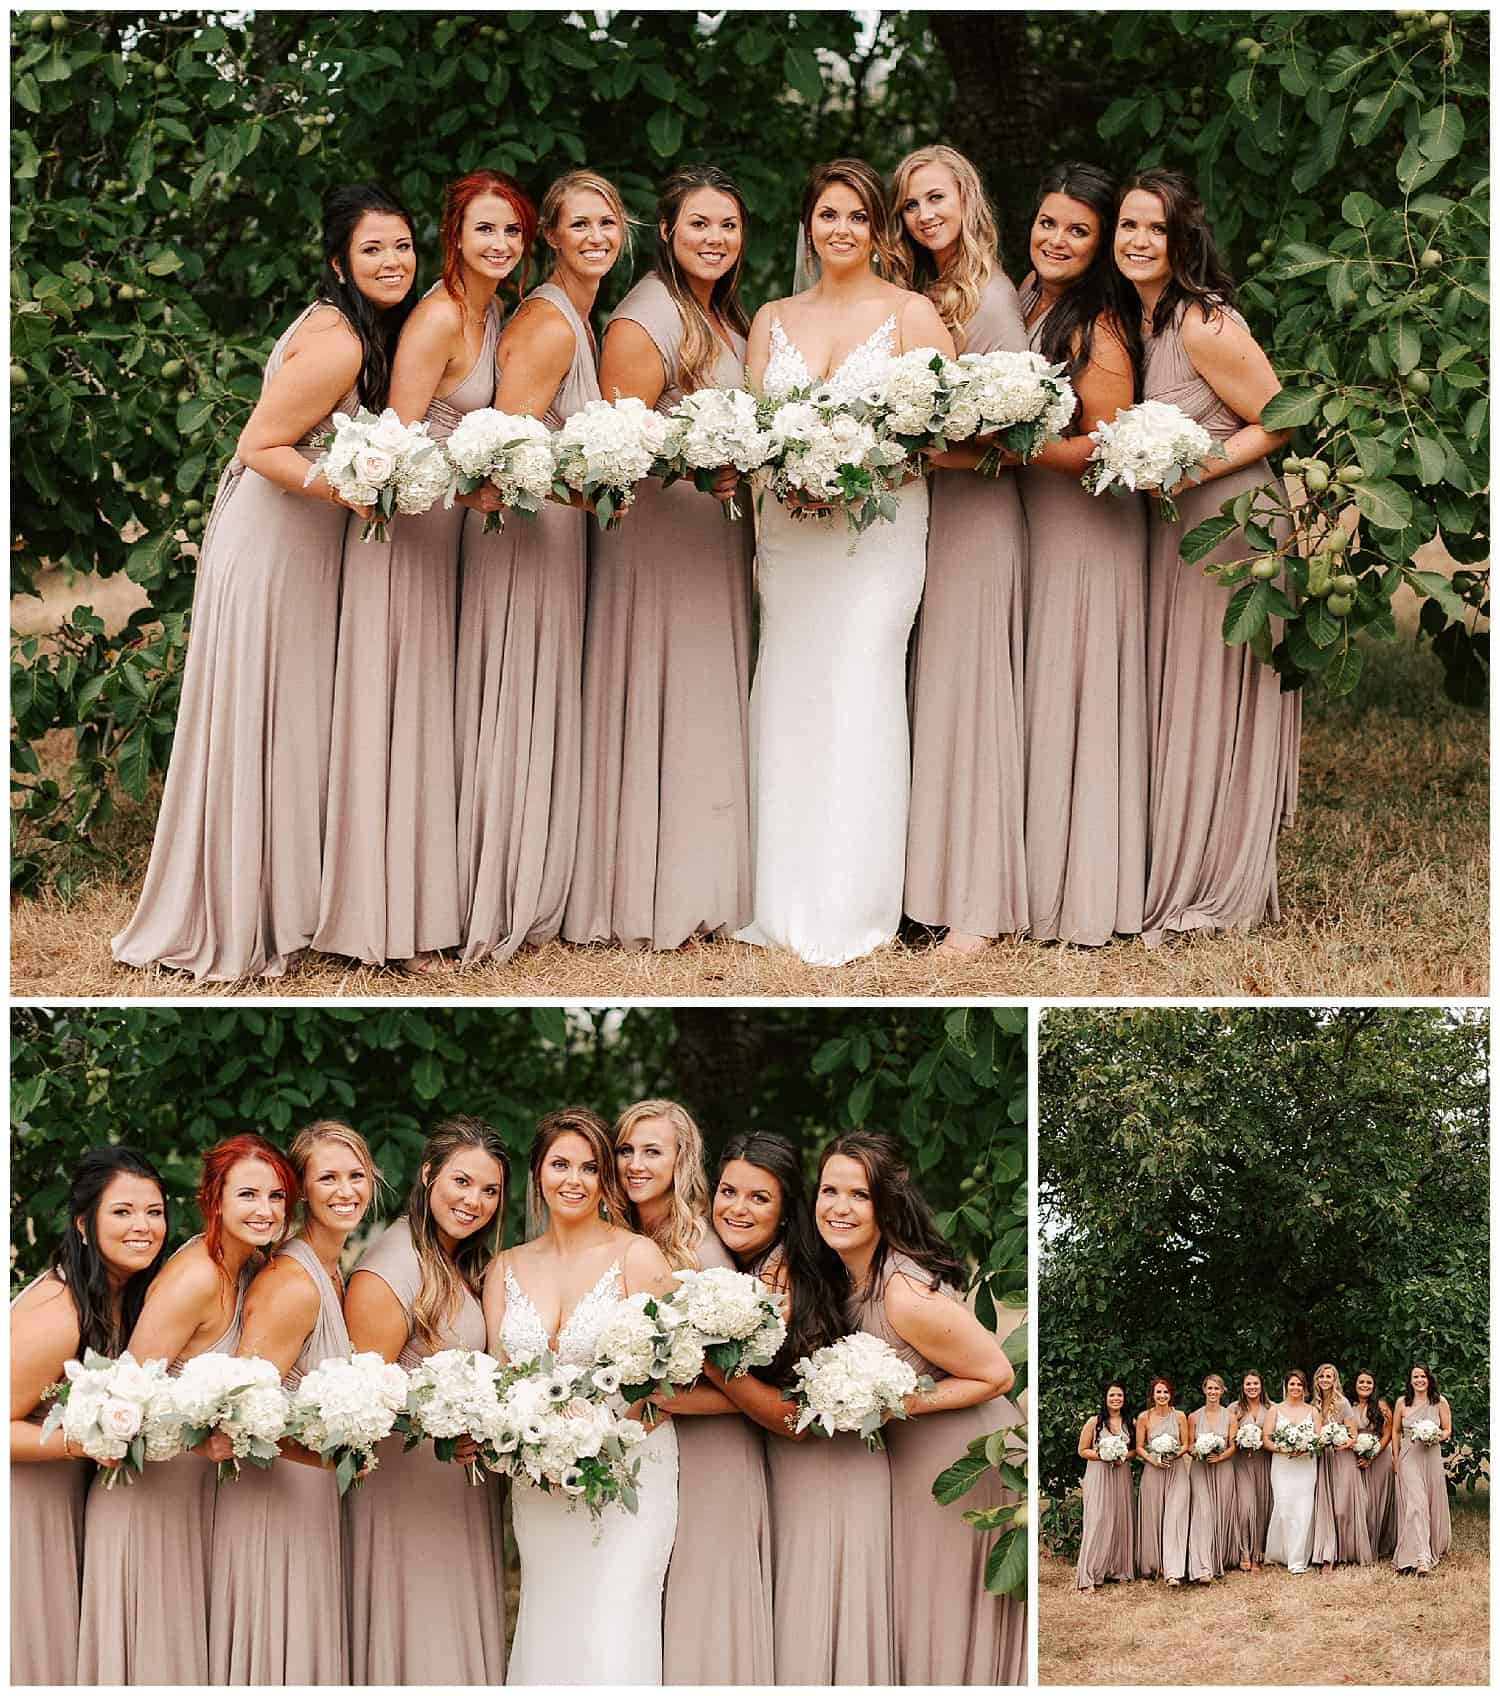 Wedding photos at the Comforts of Whidbey wedding venue